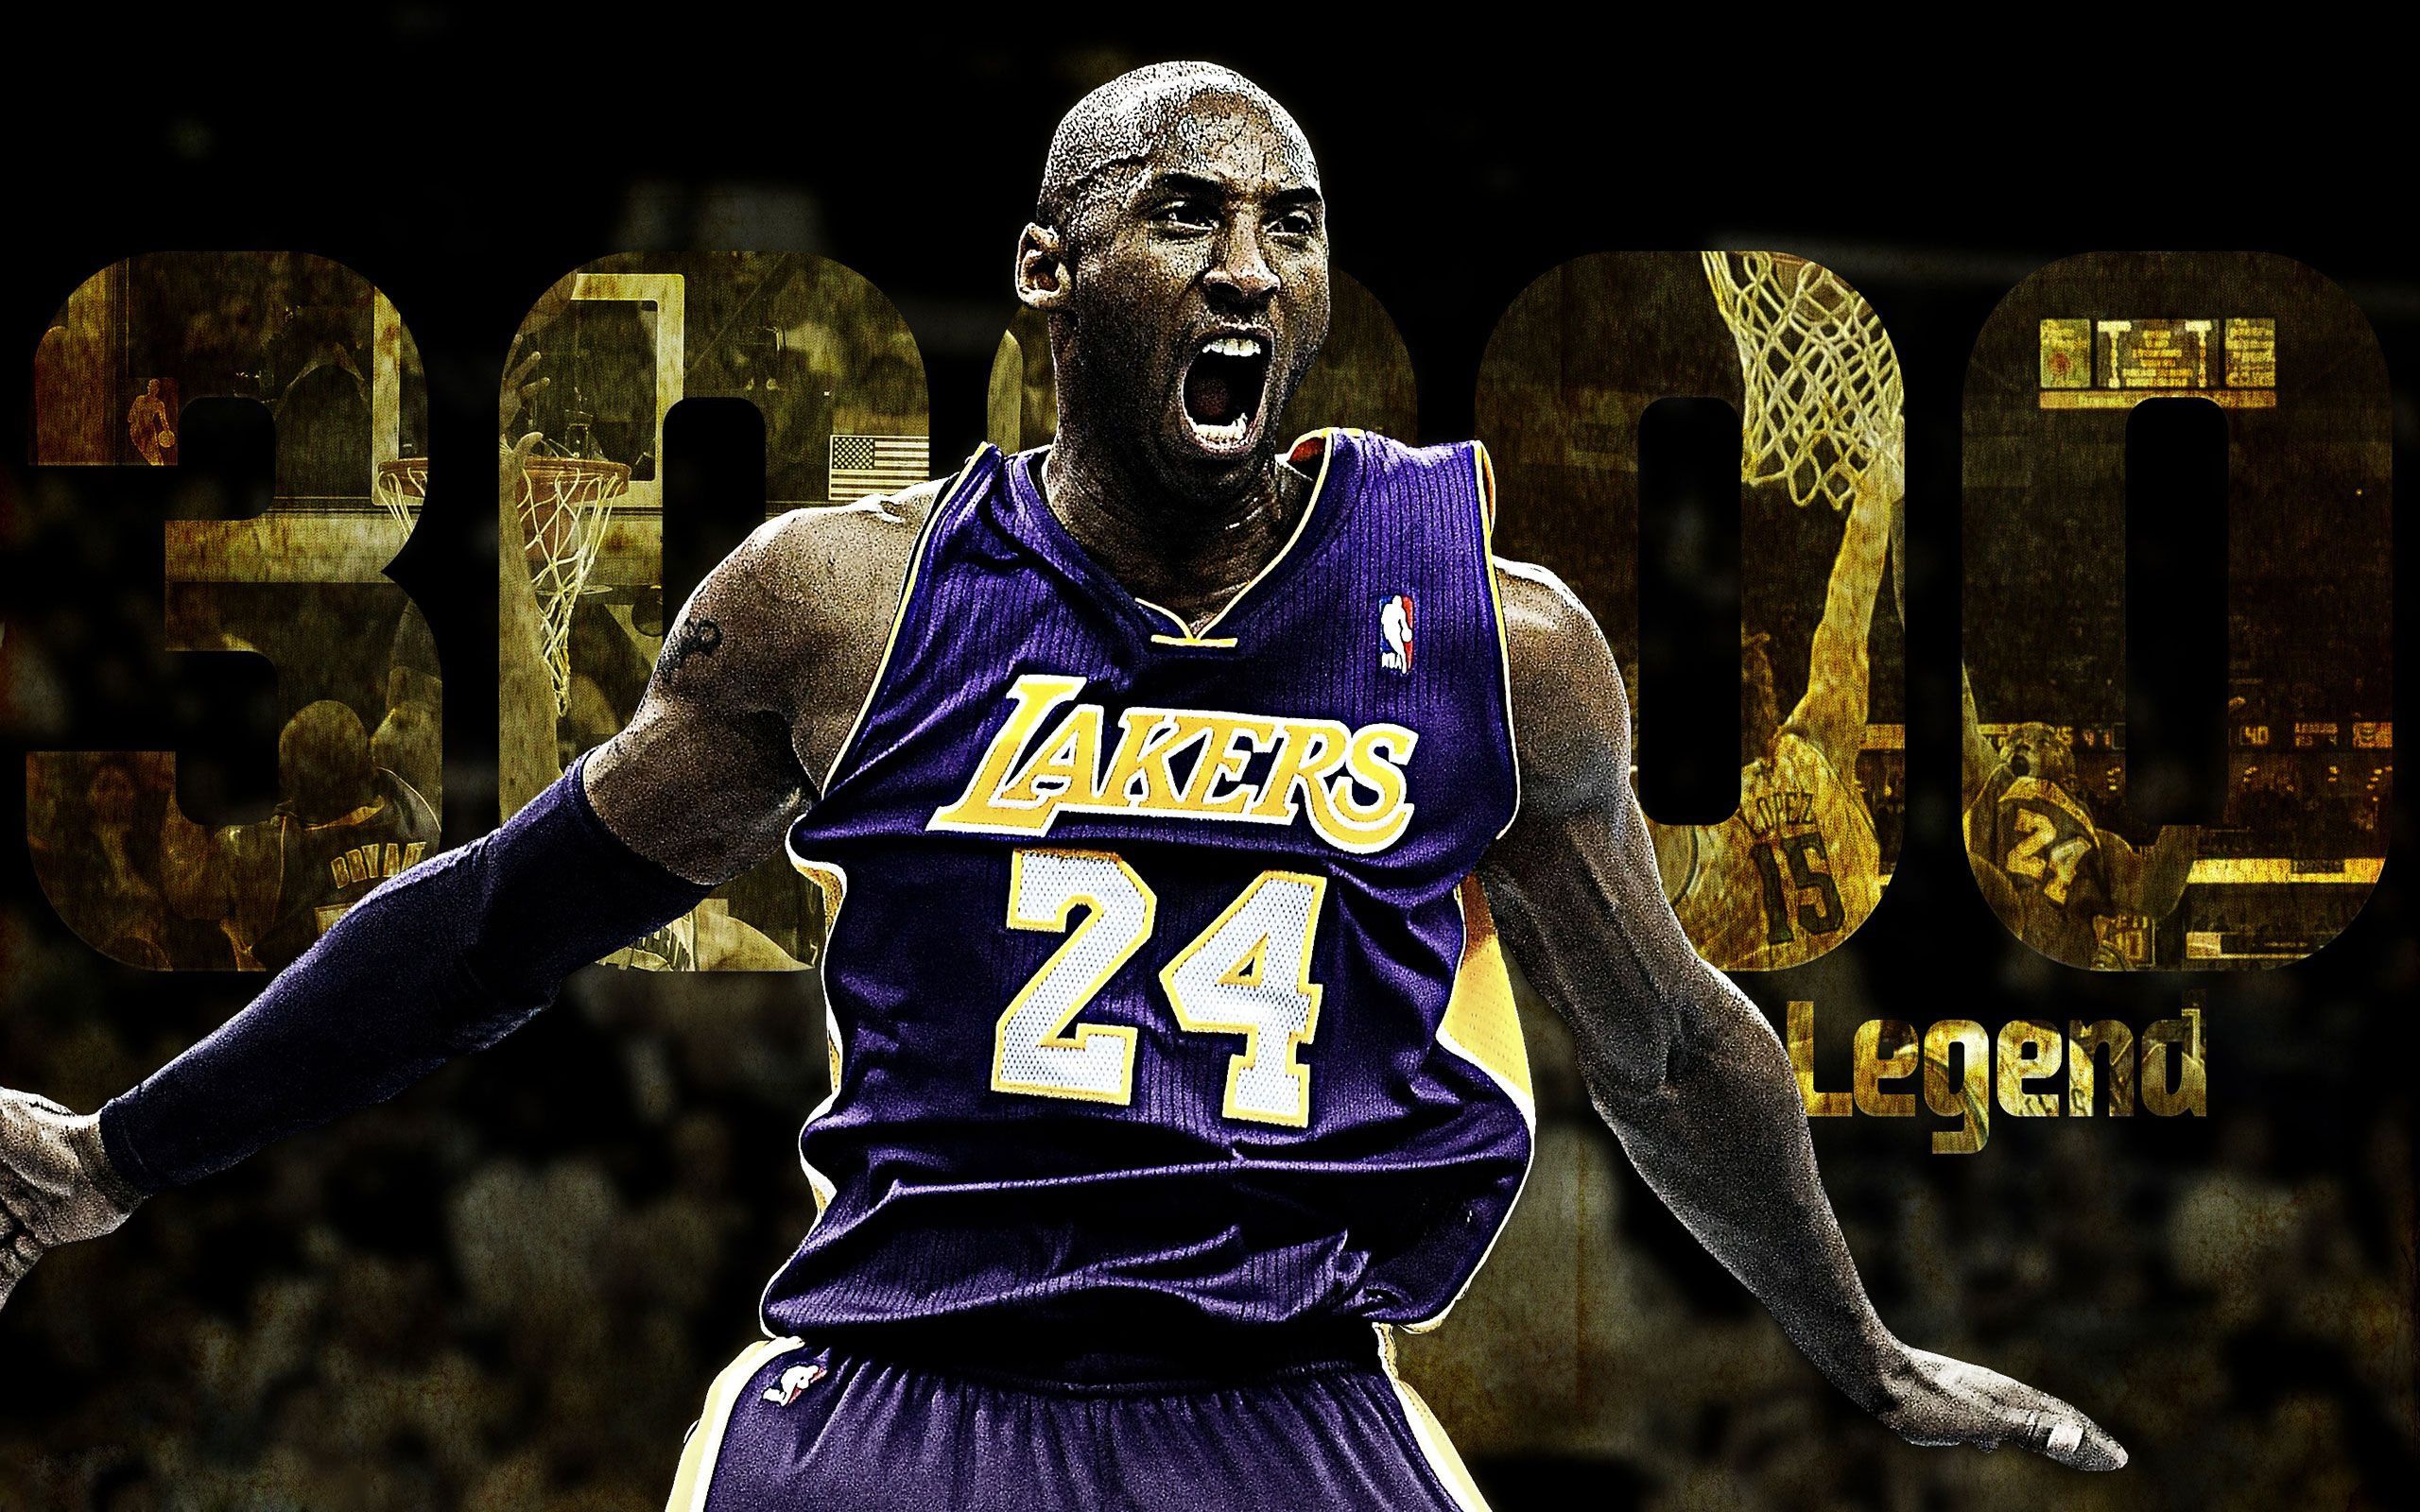 Download wallpaper Kobe Bryant, NBA, LA Lakers, fan art, basketball players, Los Angeles Lakers for desktop with resolution 2560x1600. High Quality HD picture wallpaper